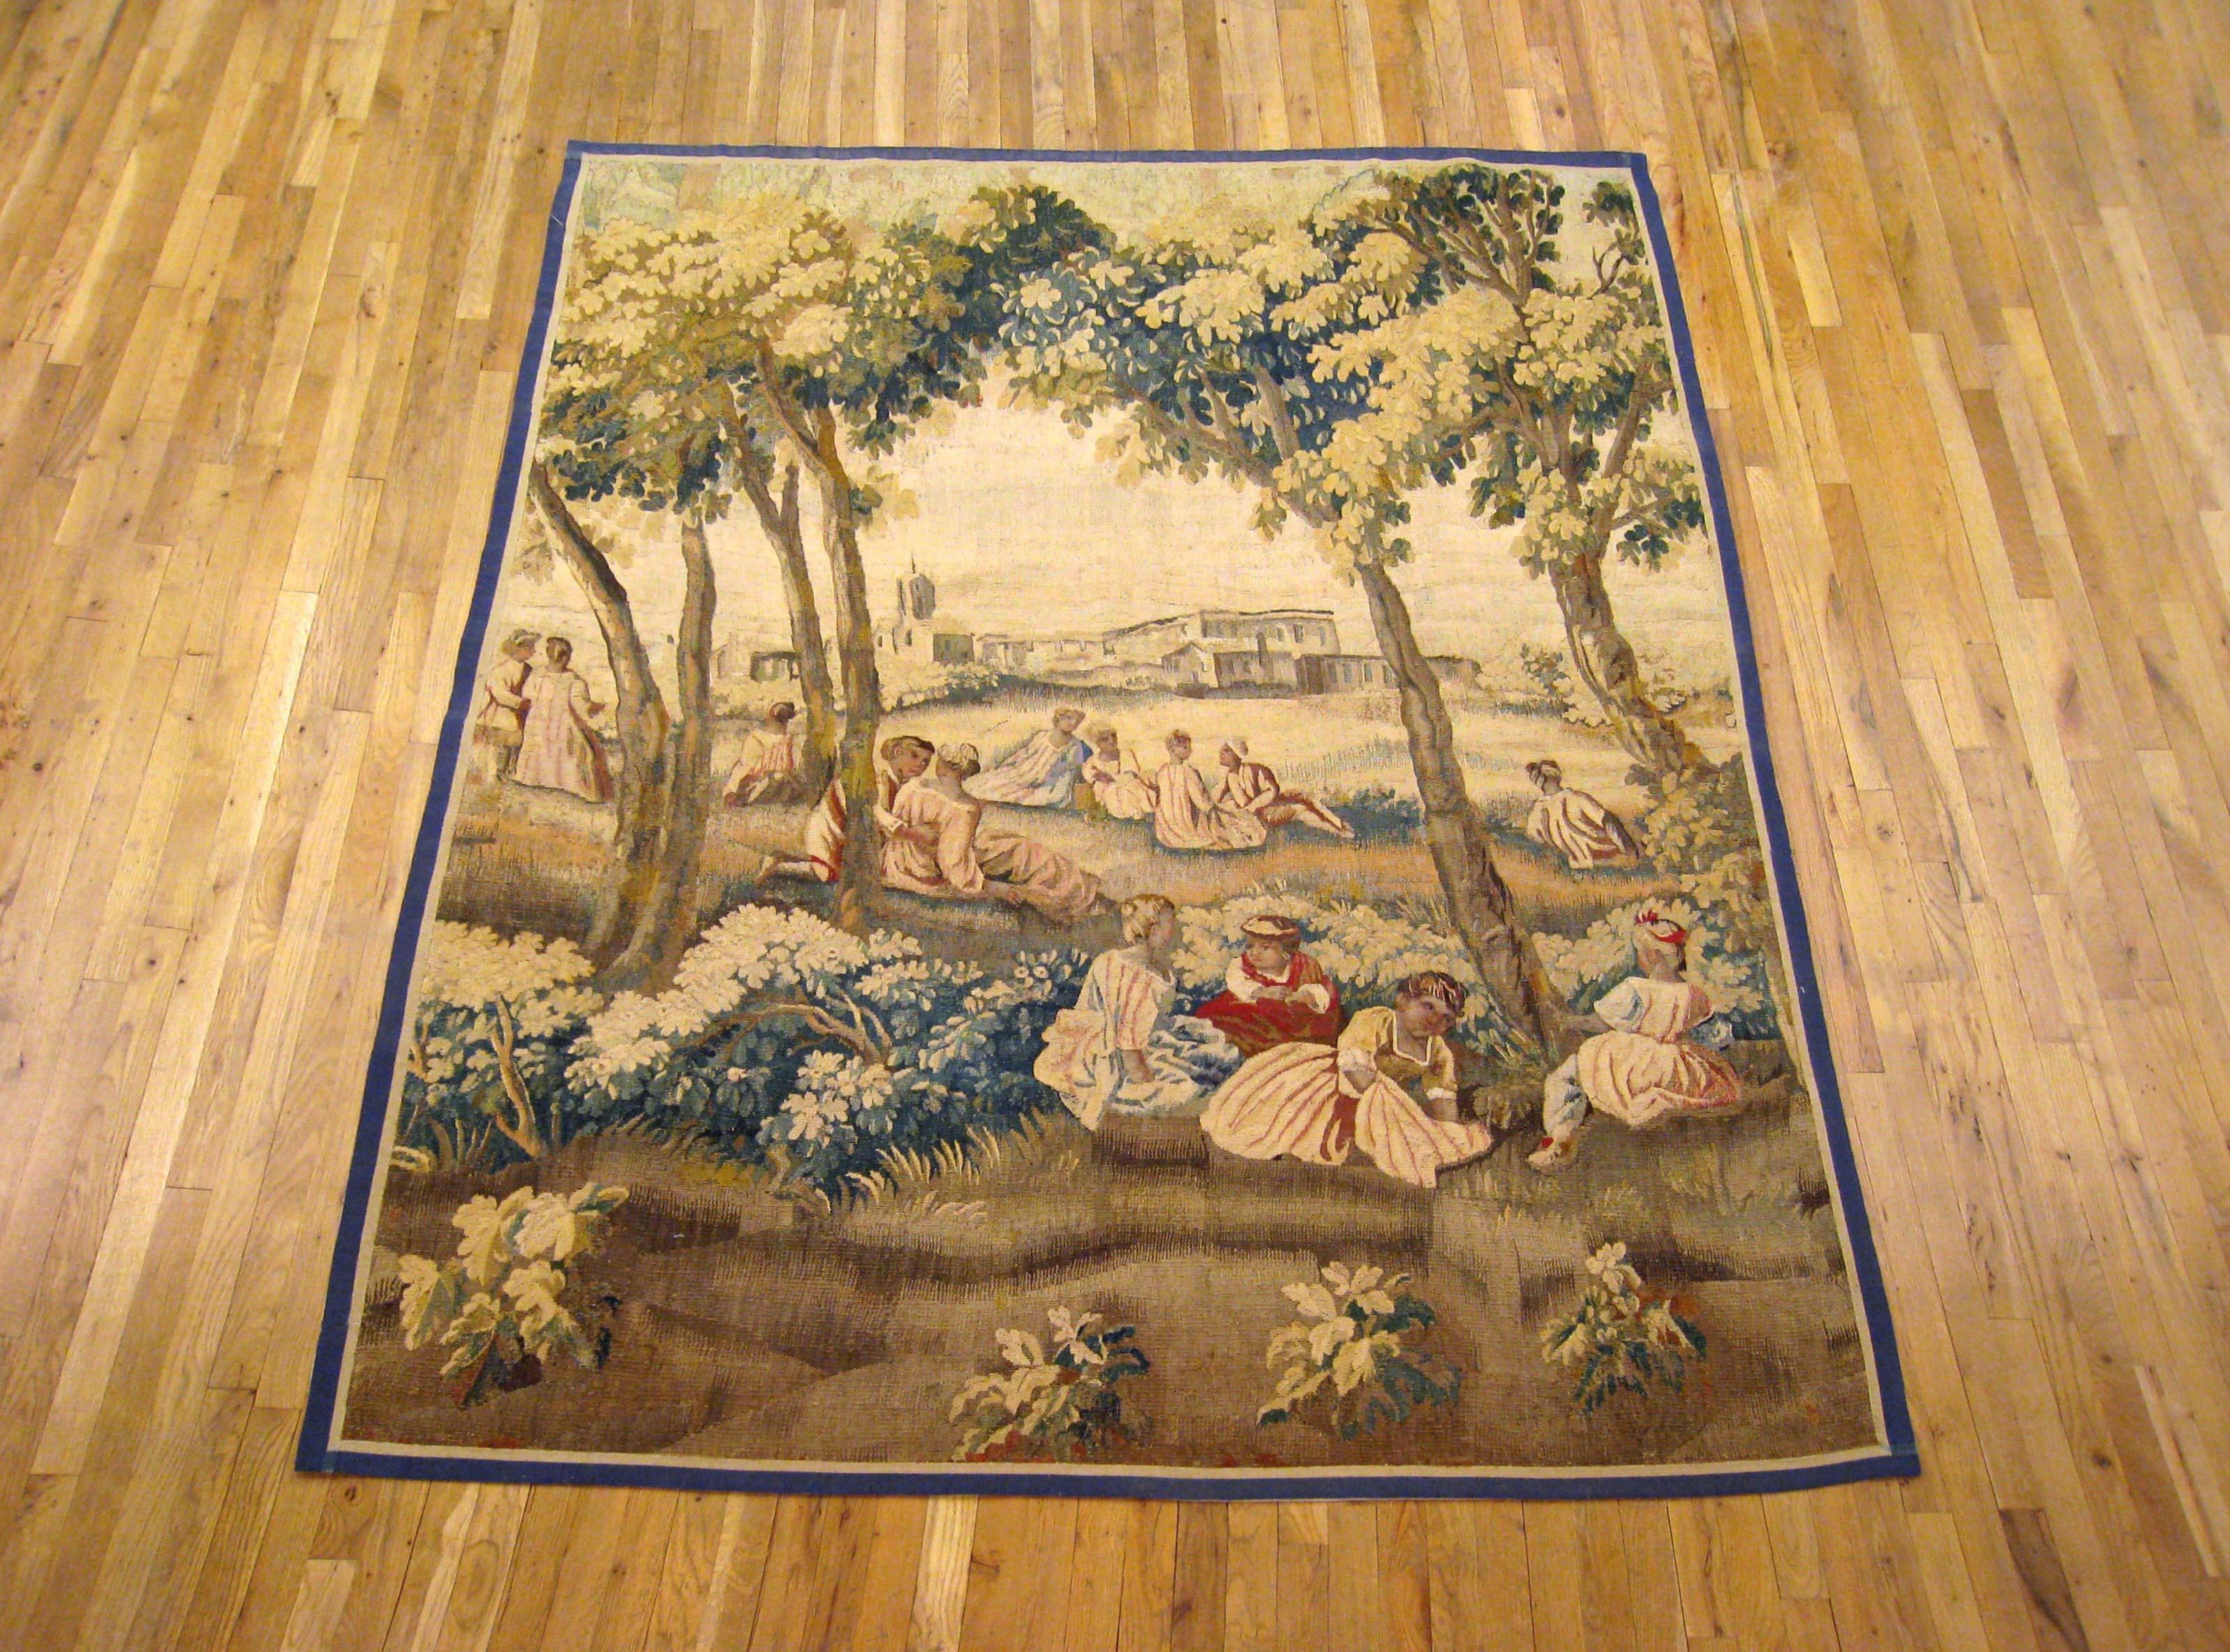 A French Aubusson rustic tapestry panel from the 18th century, featuring several women and children in the foreground, tending to various chores while seated in a grassy field, with several other people in the background facing the elegant